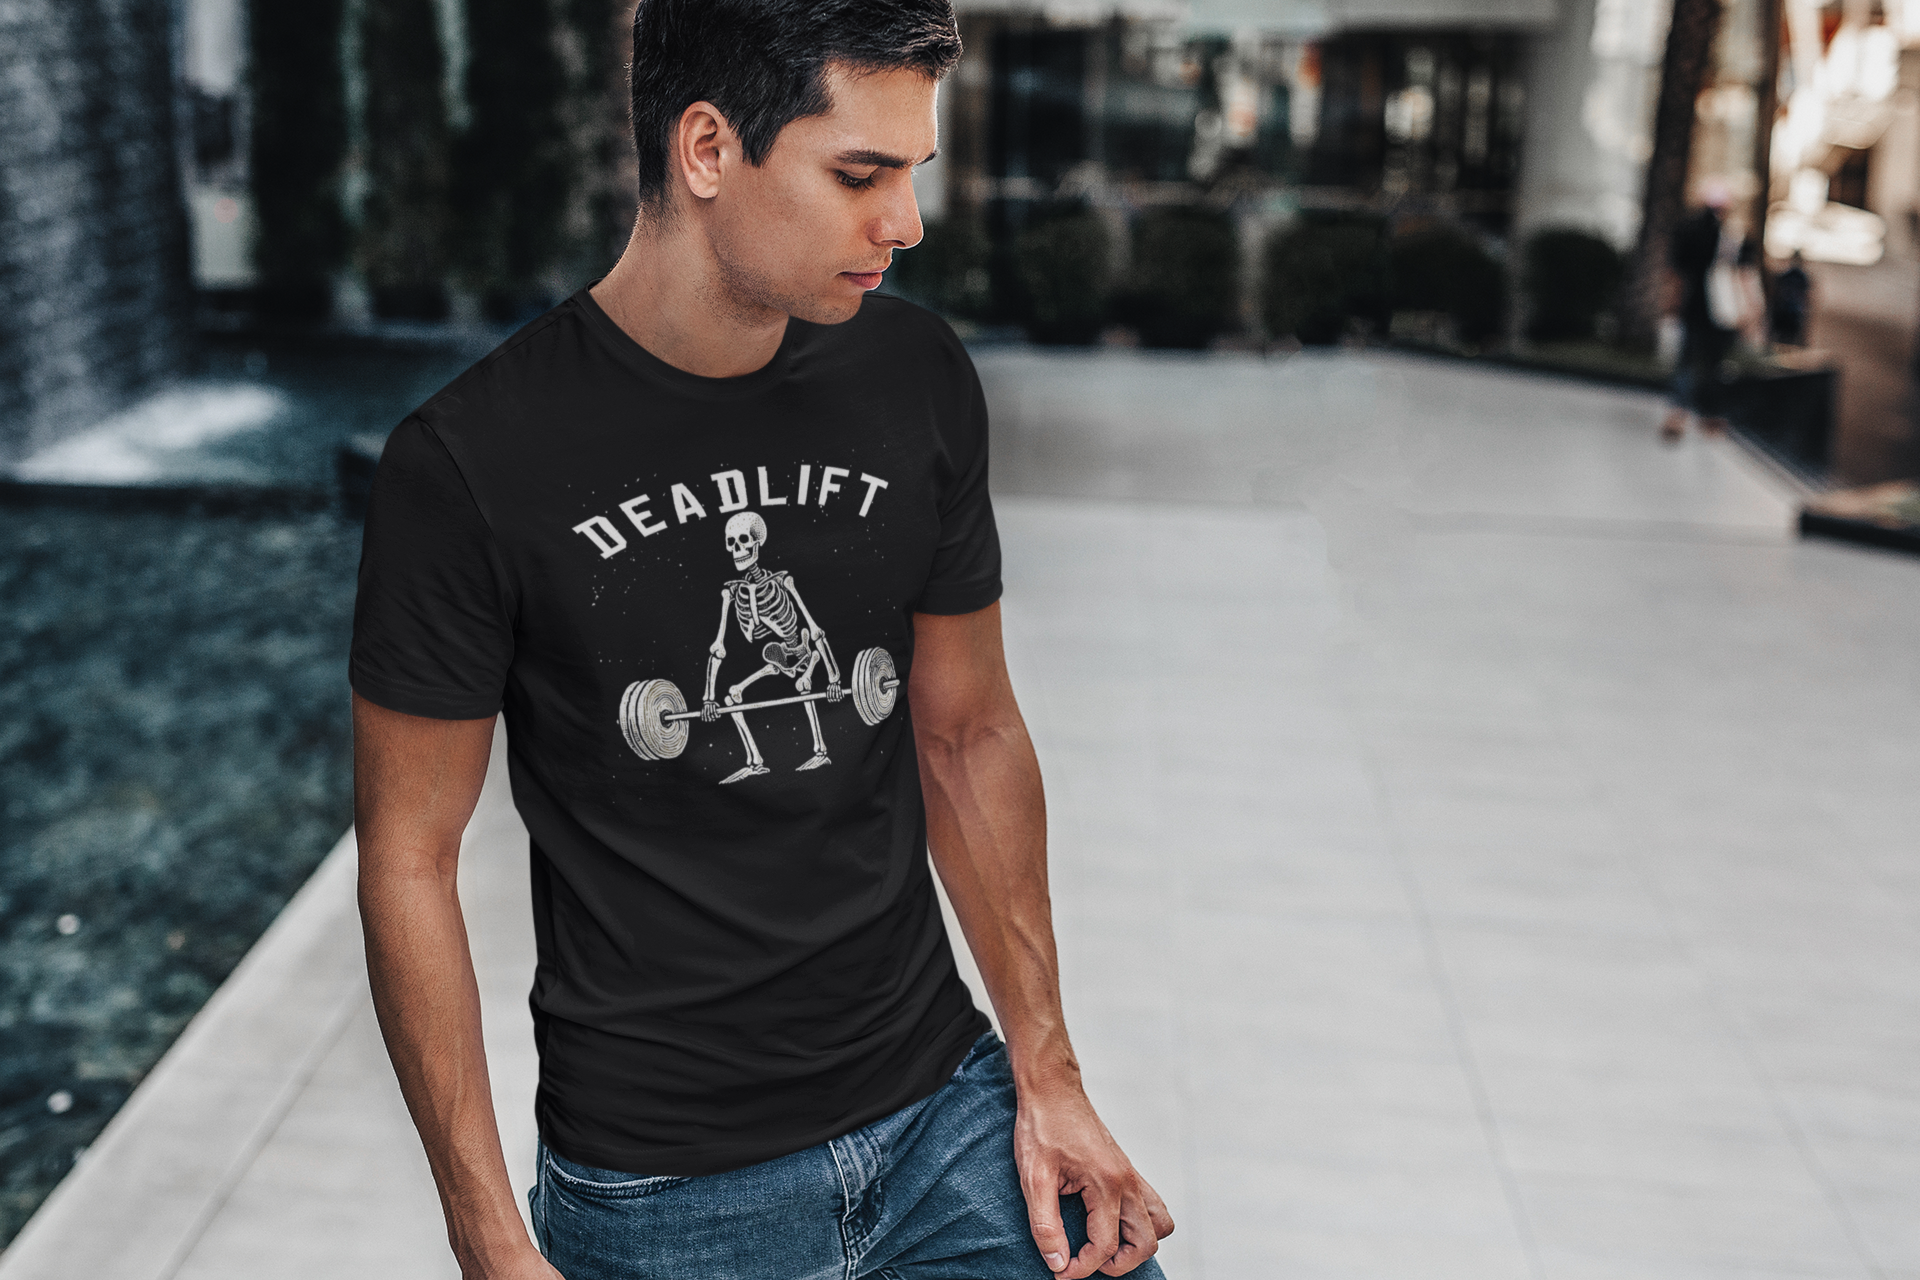 "Fitness Afterlife" tee by Latchkey Tees, humorous gym apparel, outdoor style, cool and edgy t-shirts, punny fitness fashion, versatile skeletal design.